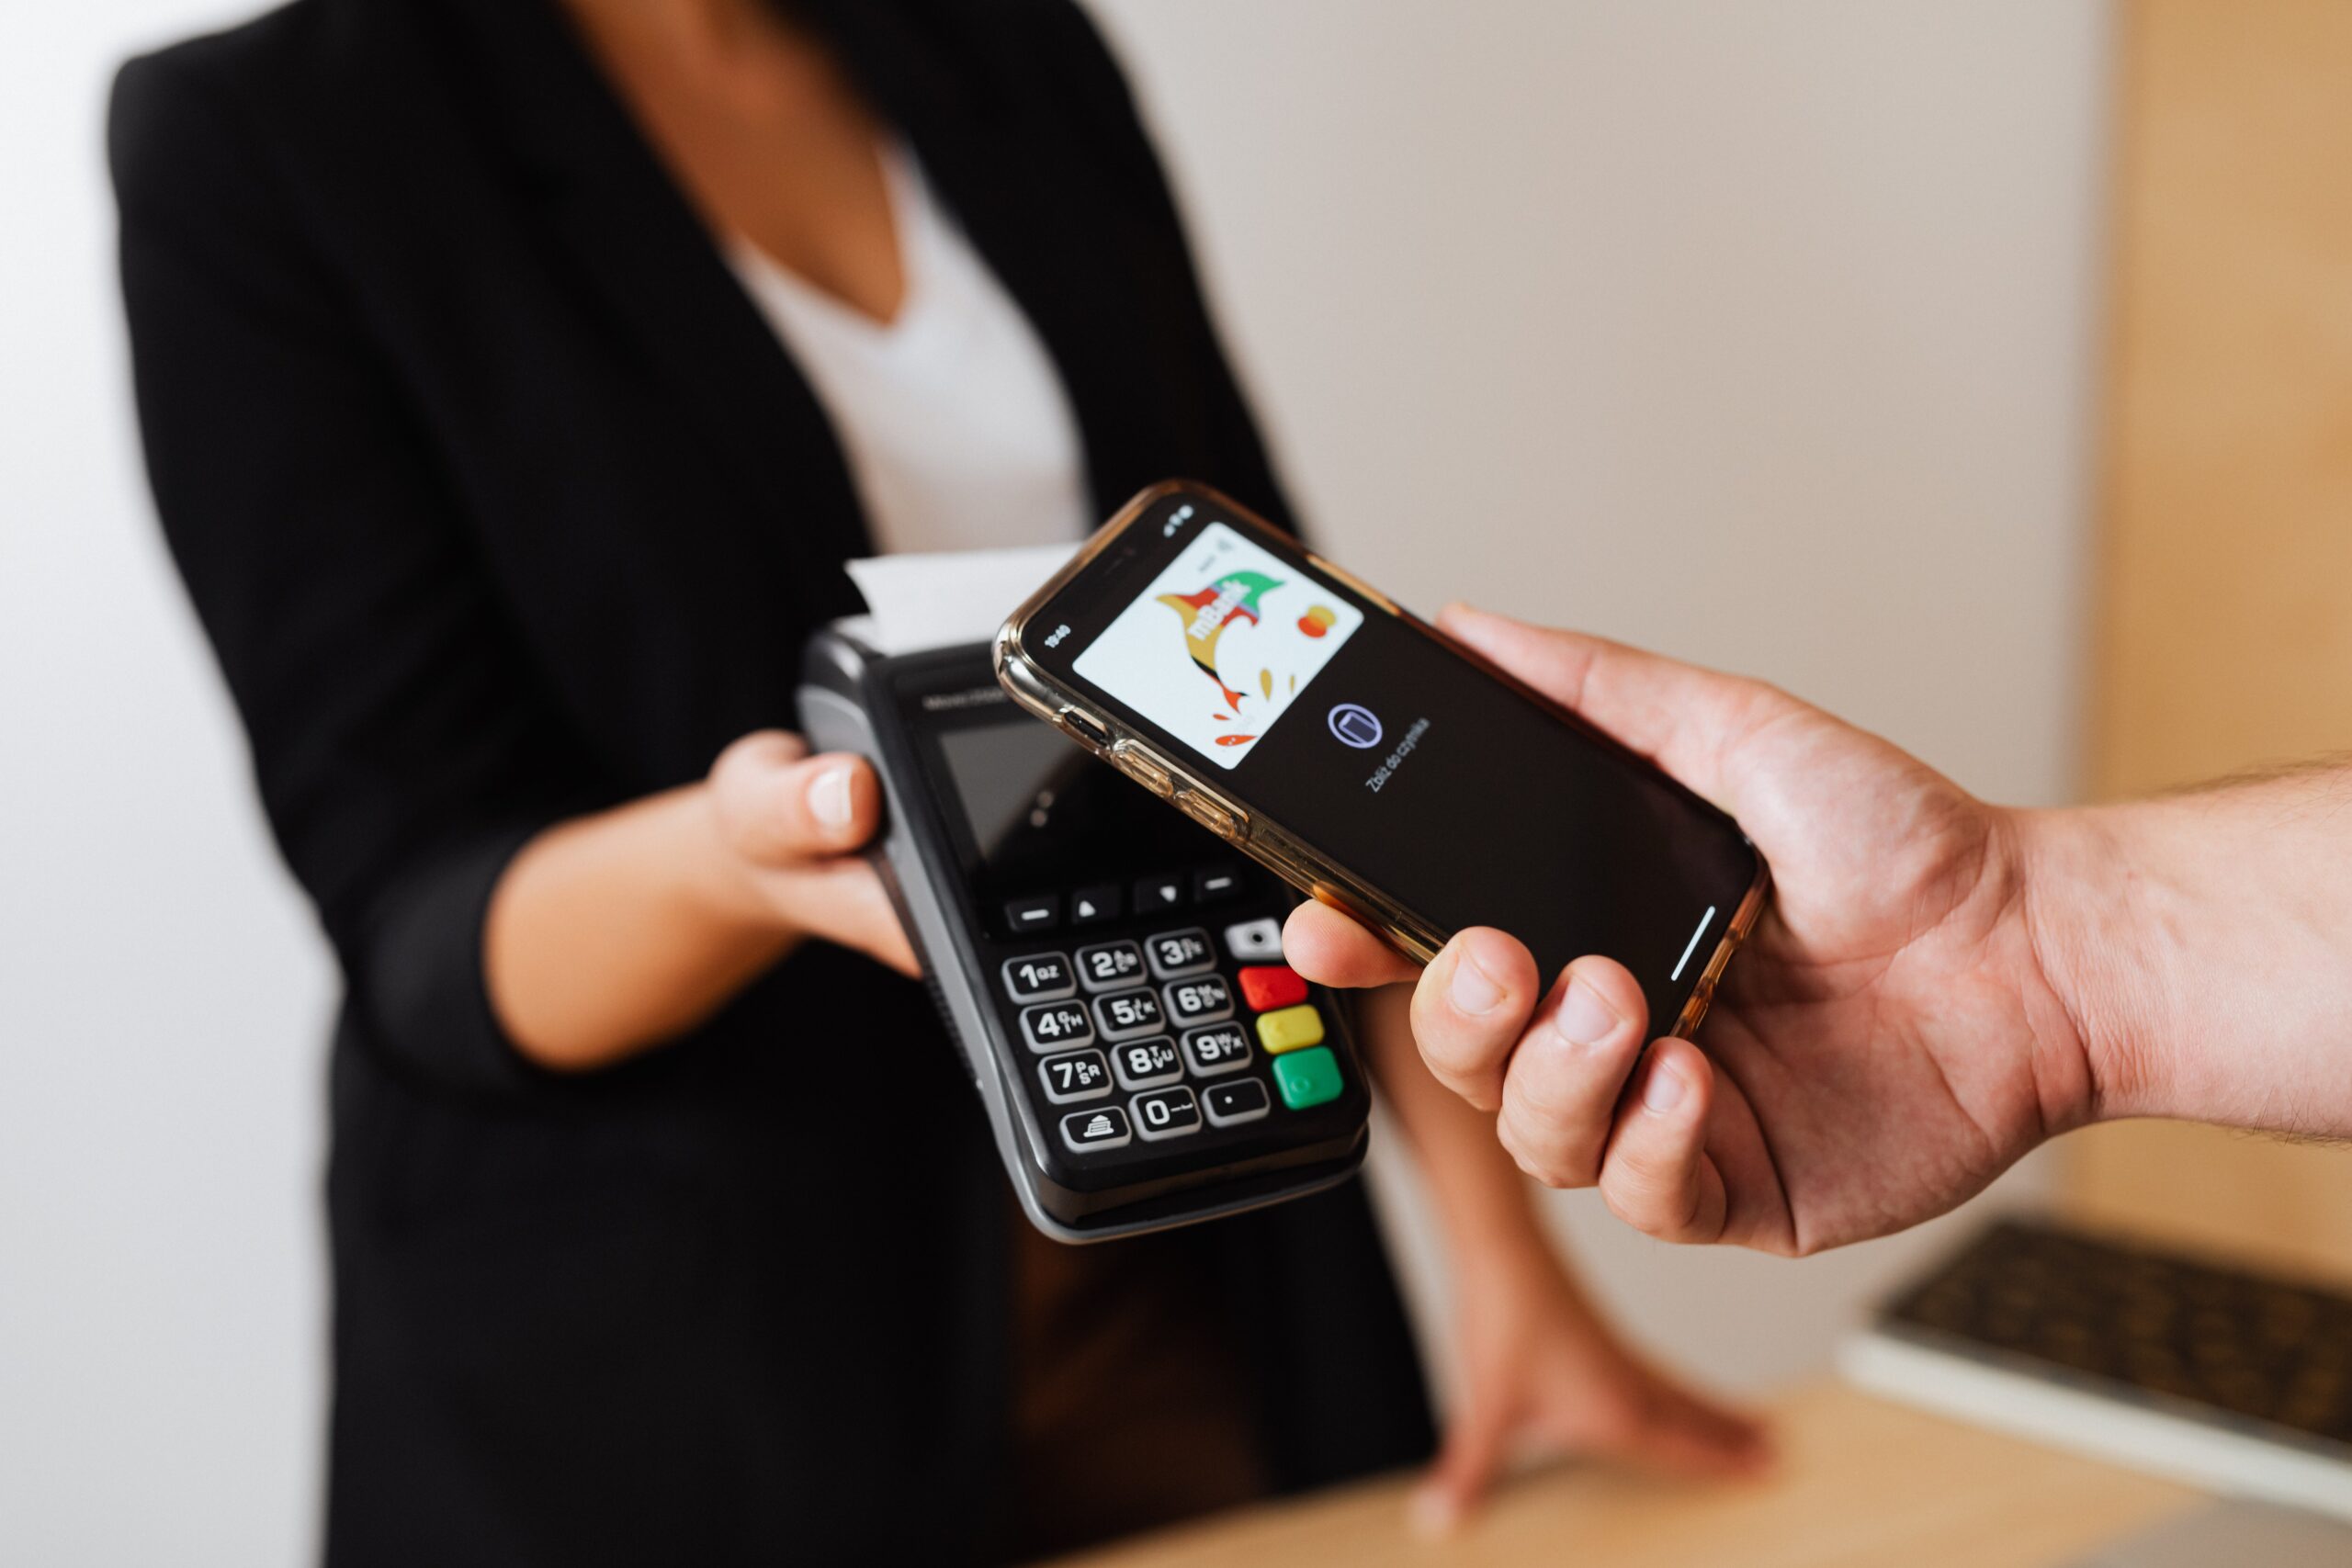 What kind of advantages can you expect from contactless payment?